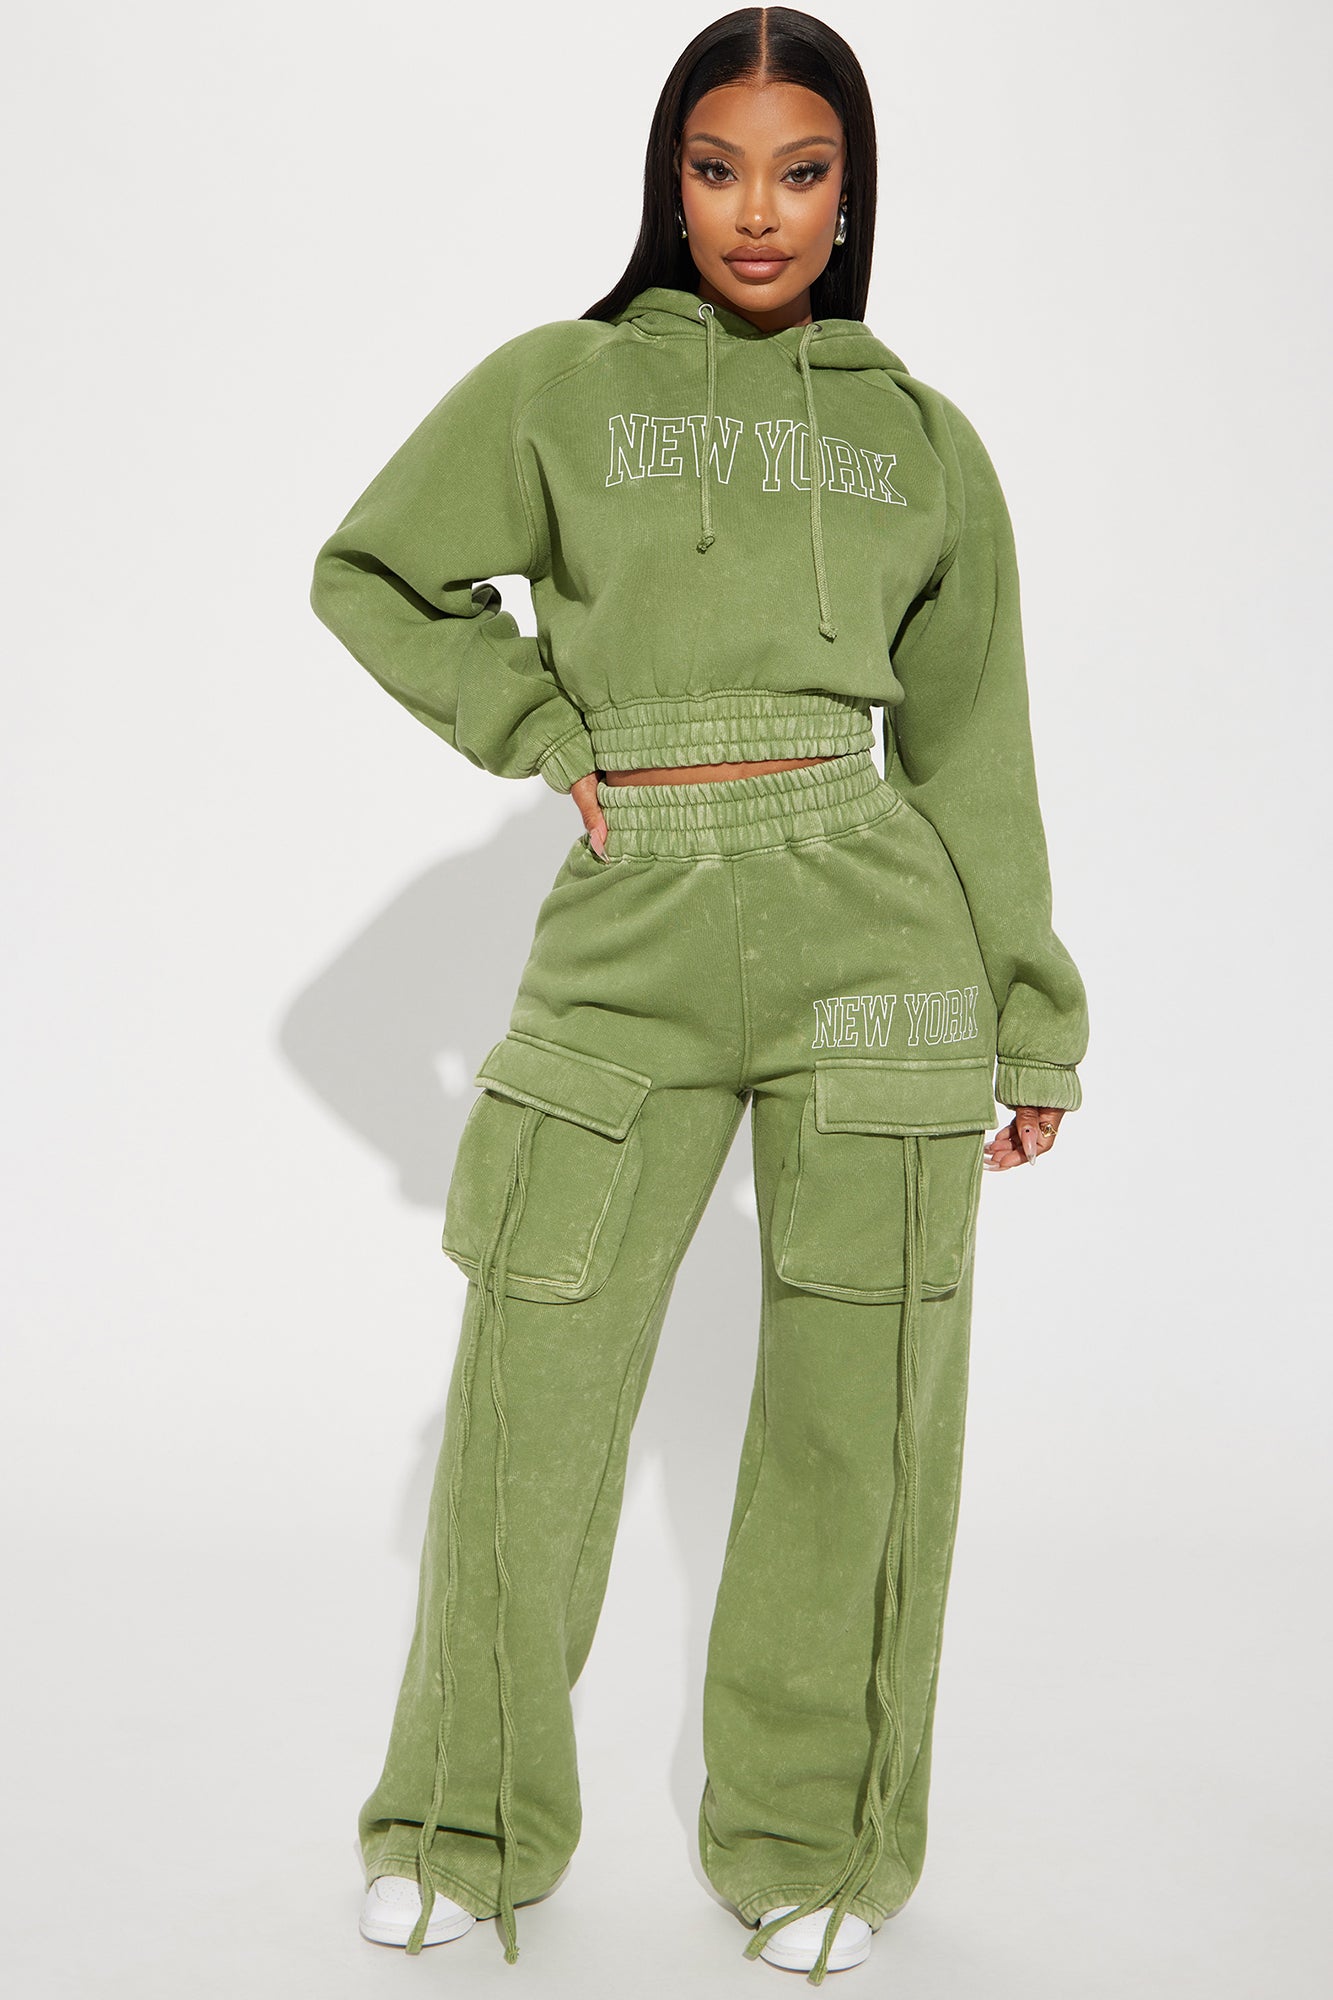 New York Vibes Washed Cargo Sweatpants - Green/combo, Fashion Nova,  Screens Tops and Bottoms